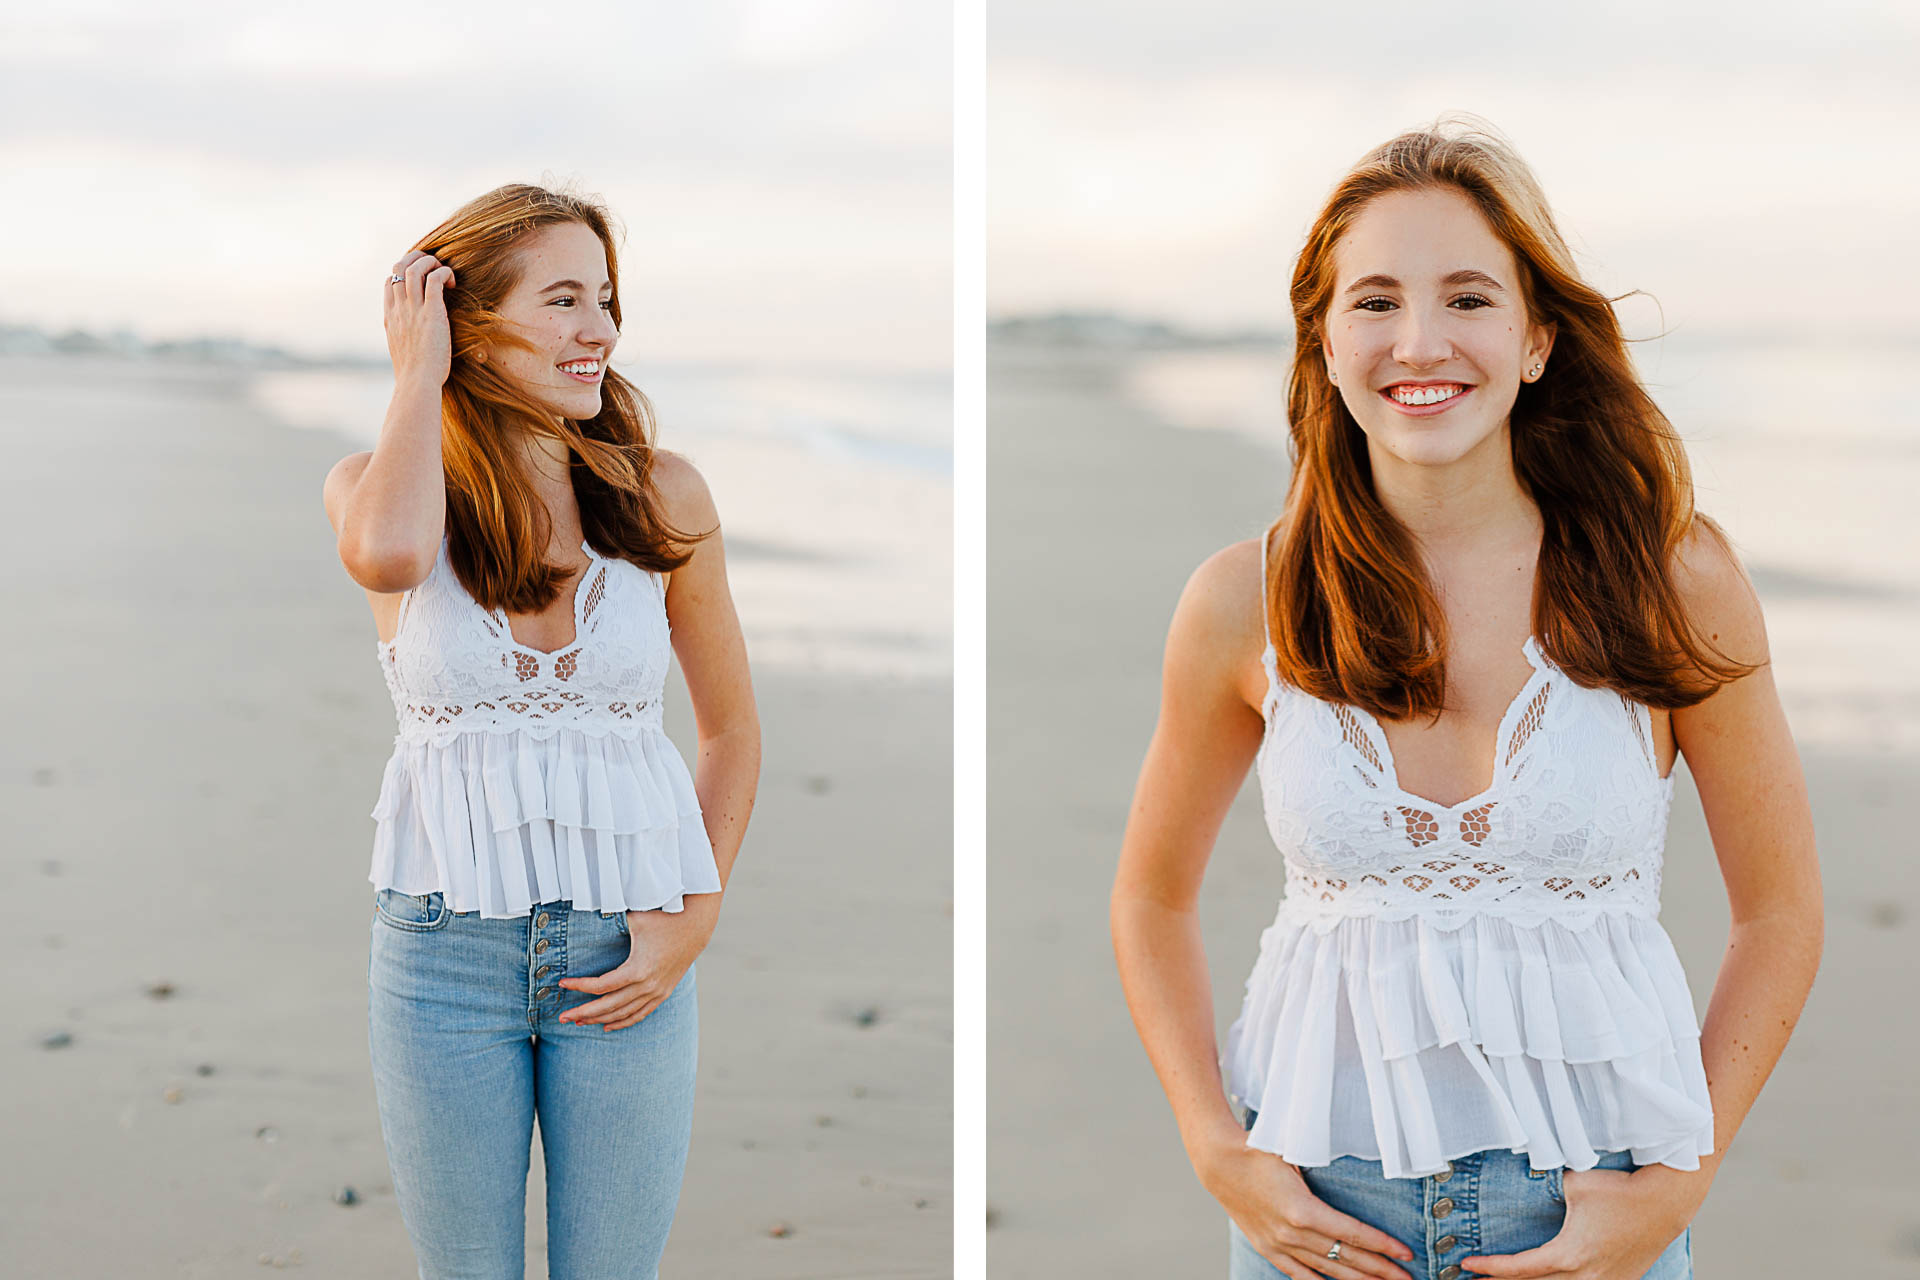 Photo by Cohasset senior photographer Christina Runnals | High school senior girl standing on the beach and smiling